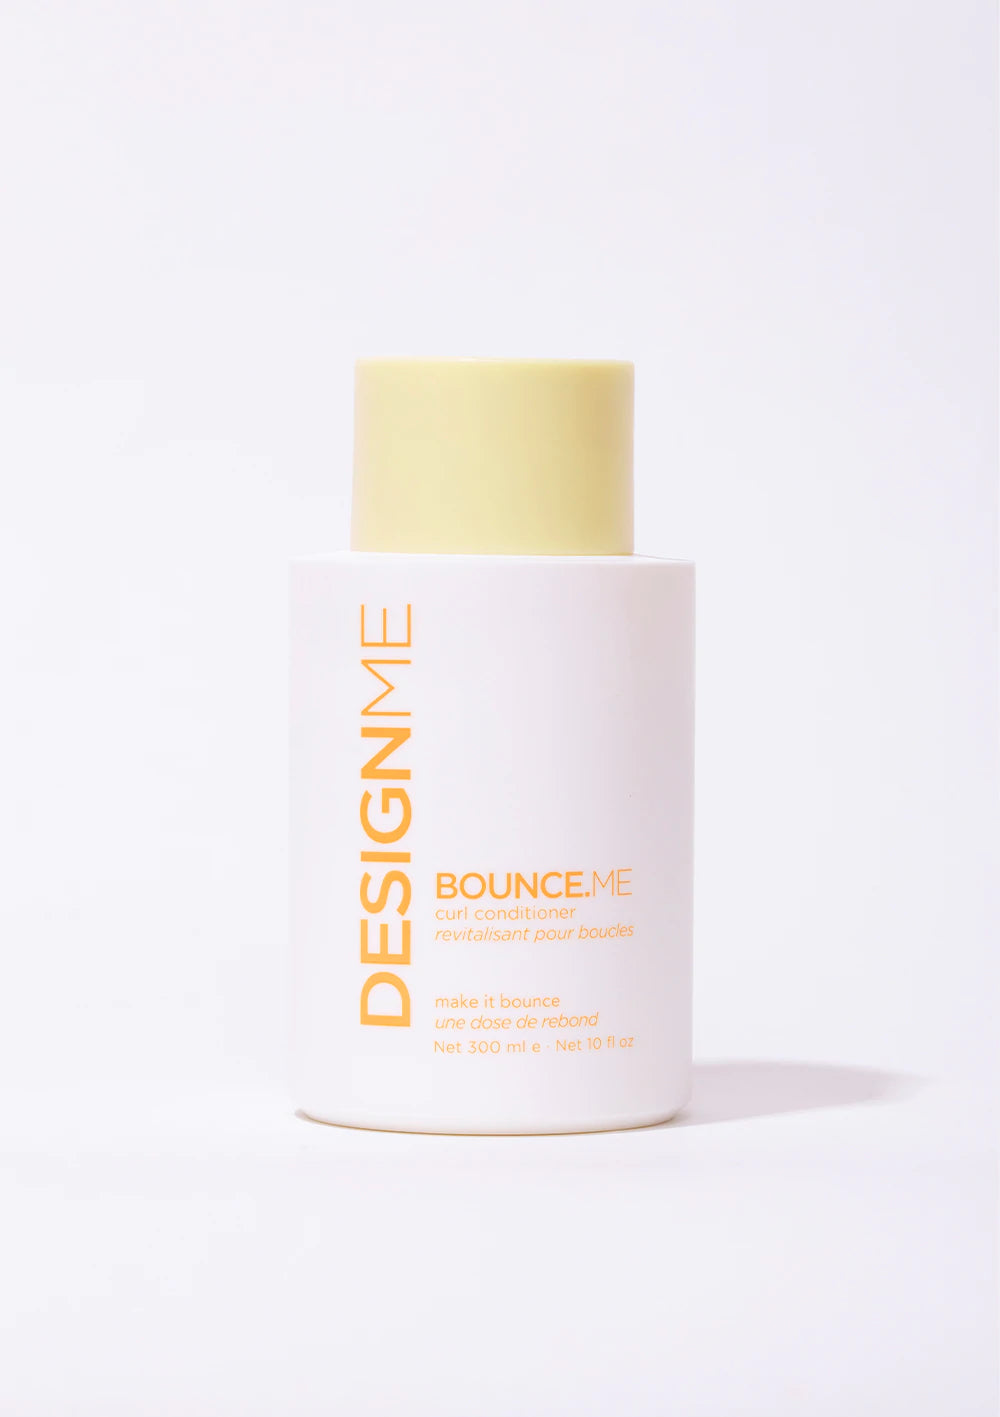 Bounce ME Curl Conditioner